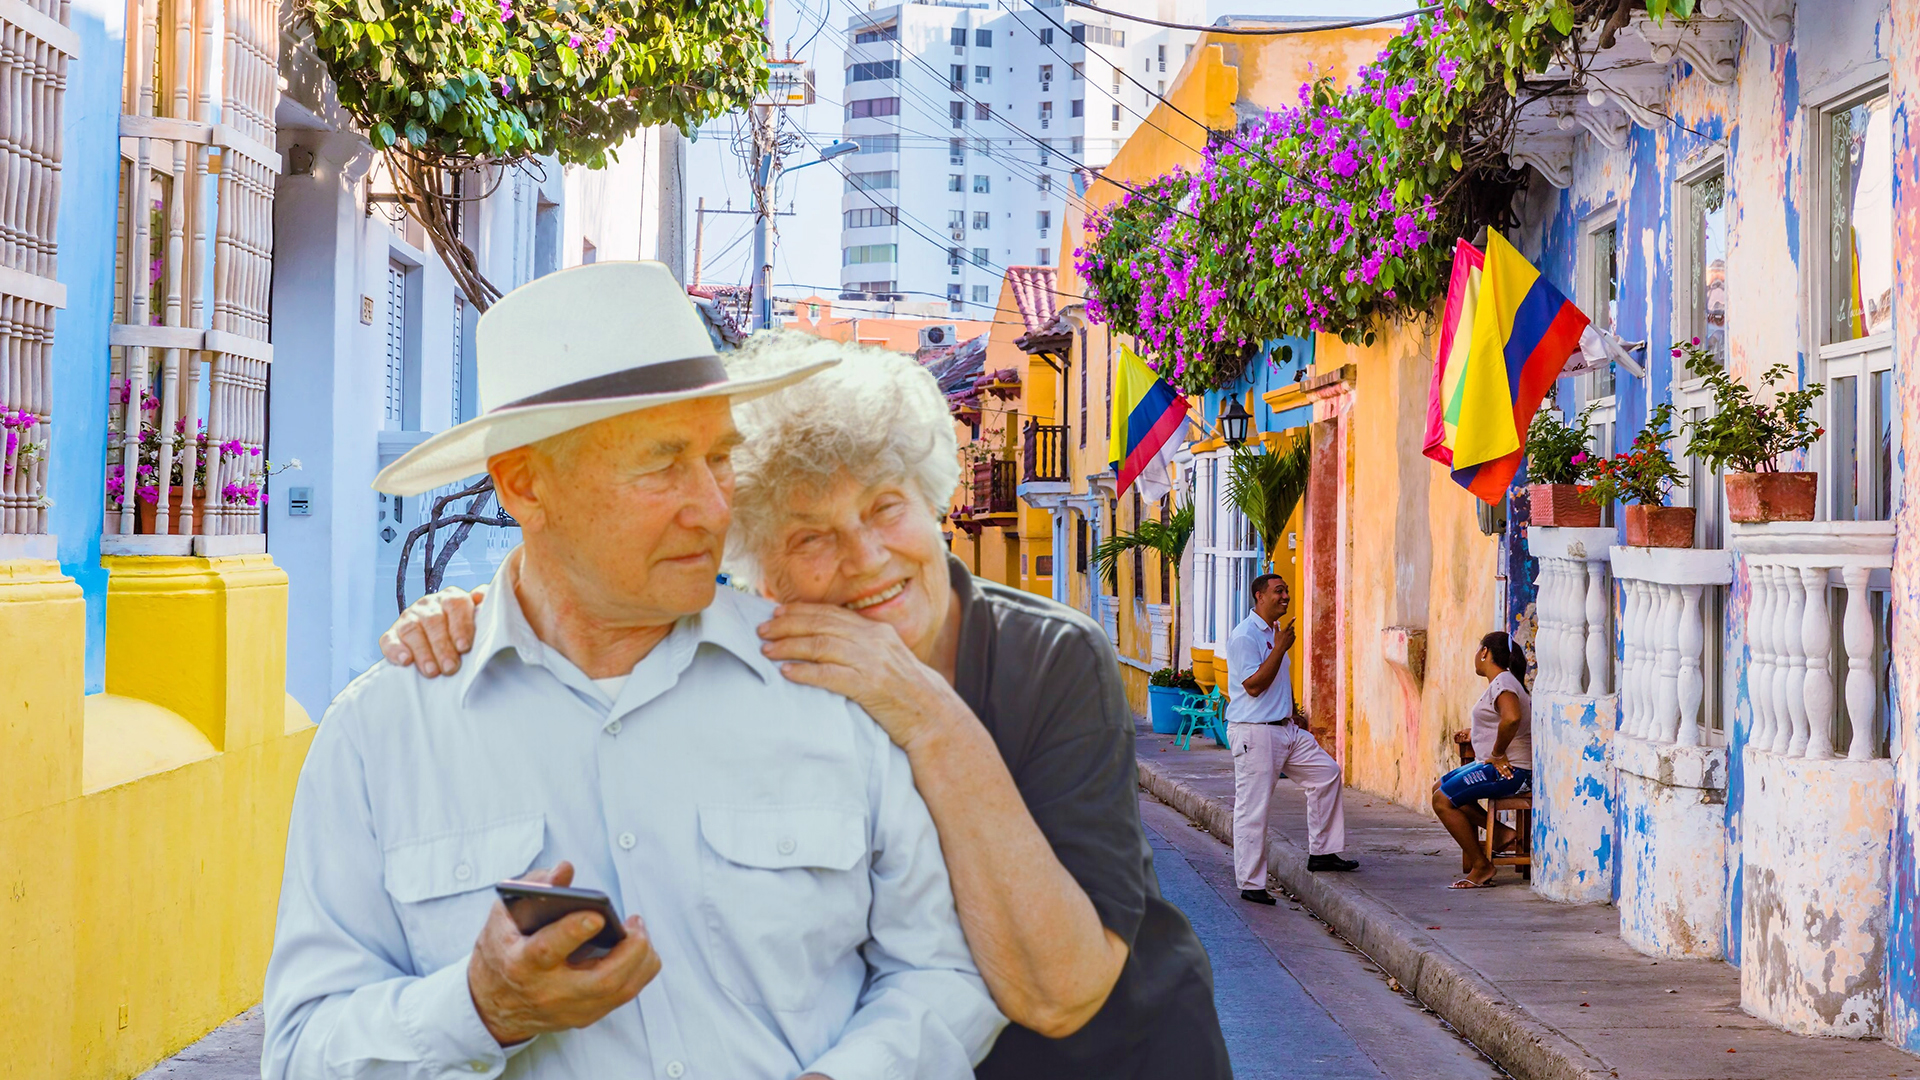 How to obtain residence in Colombia as a retiree